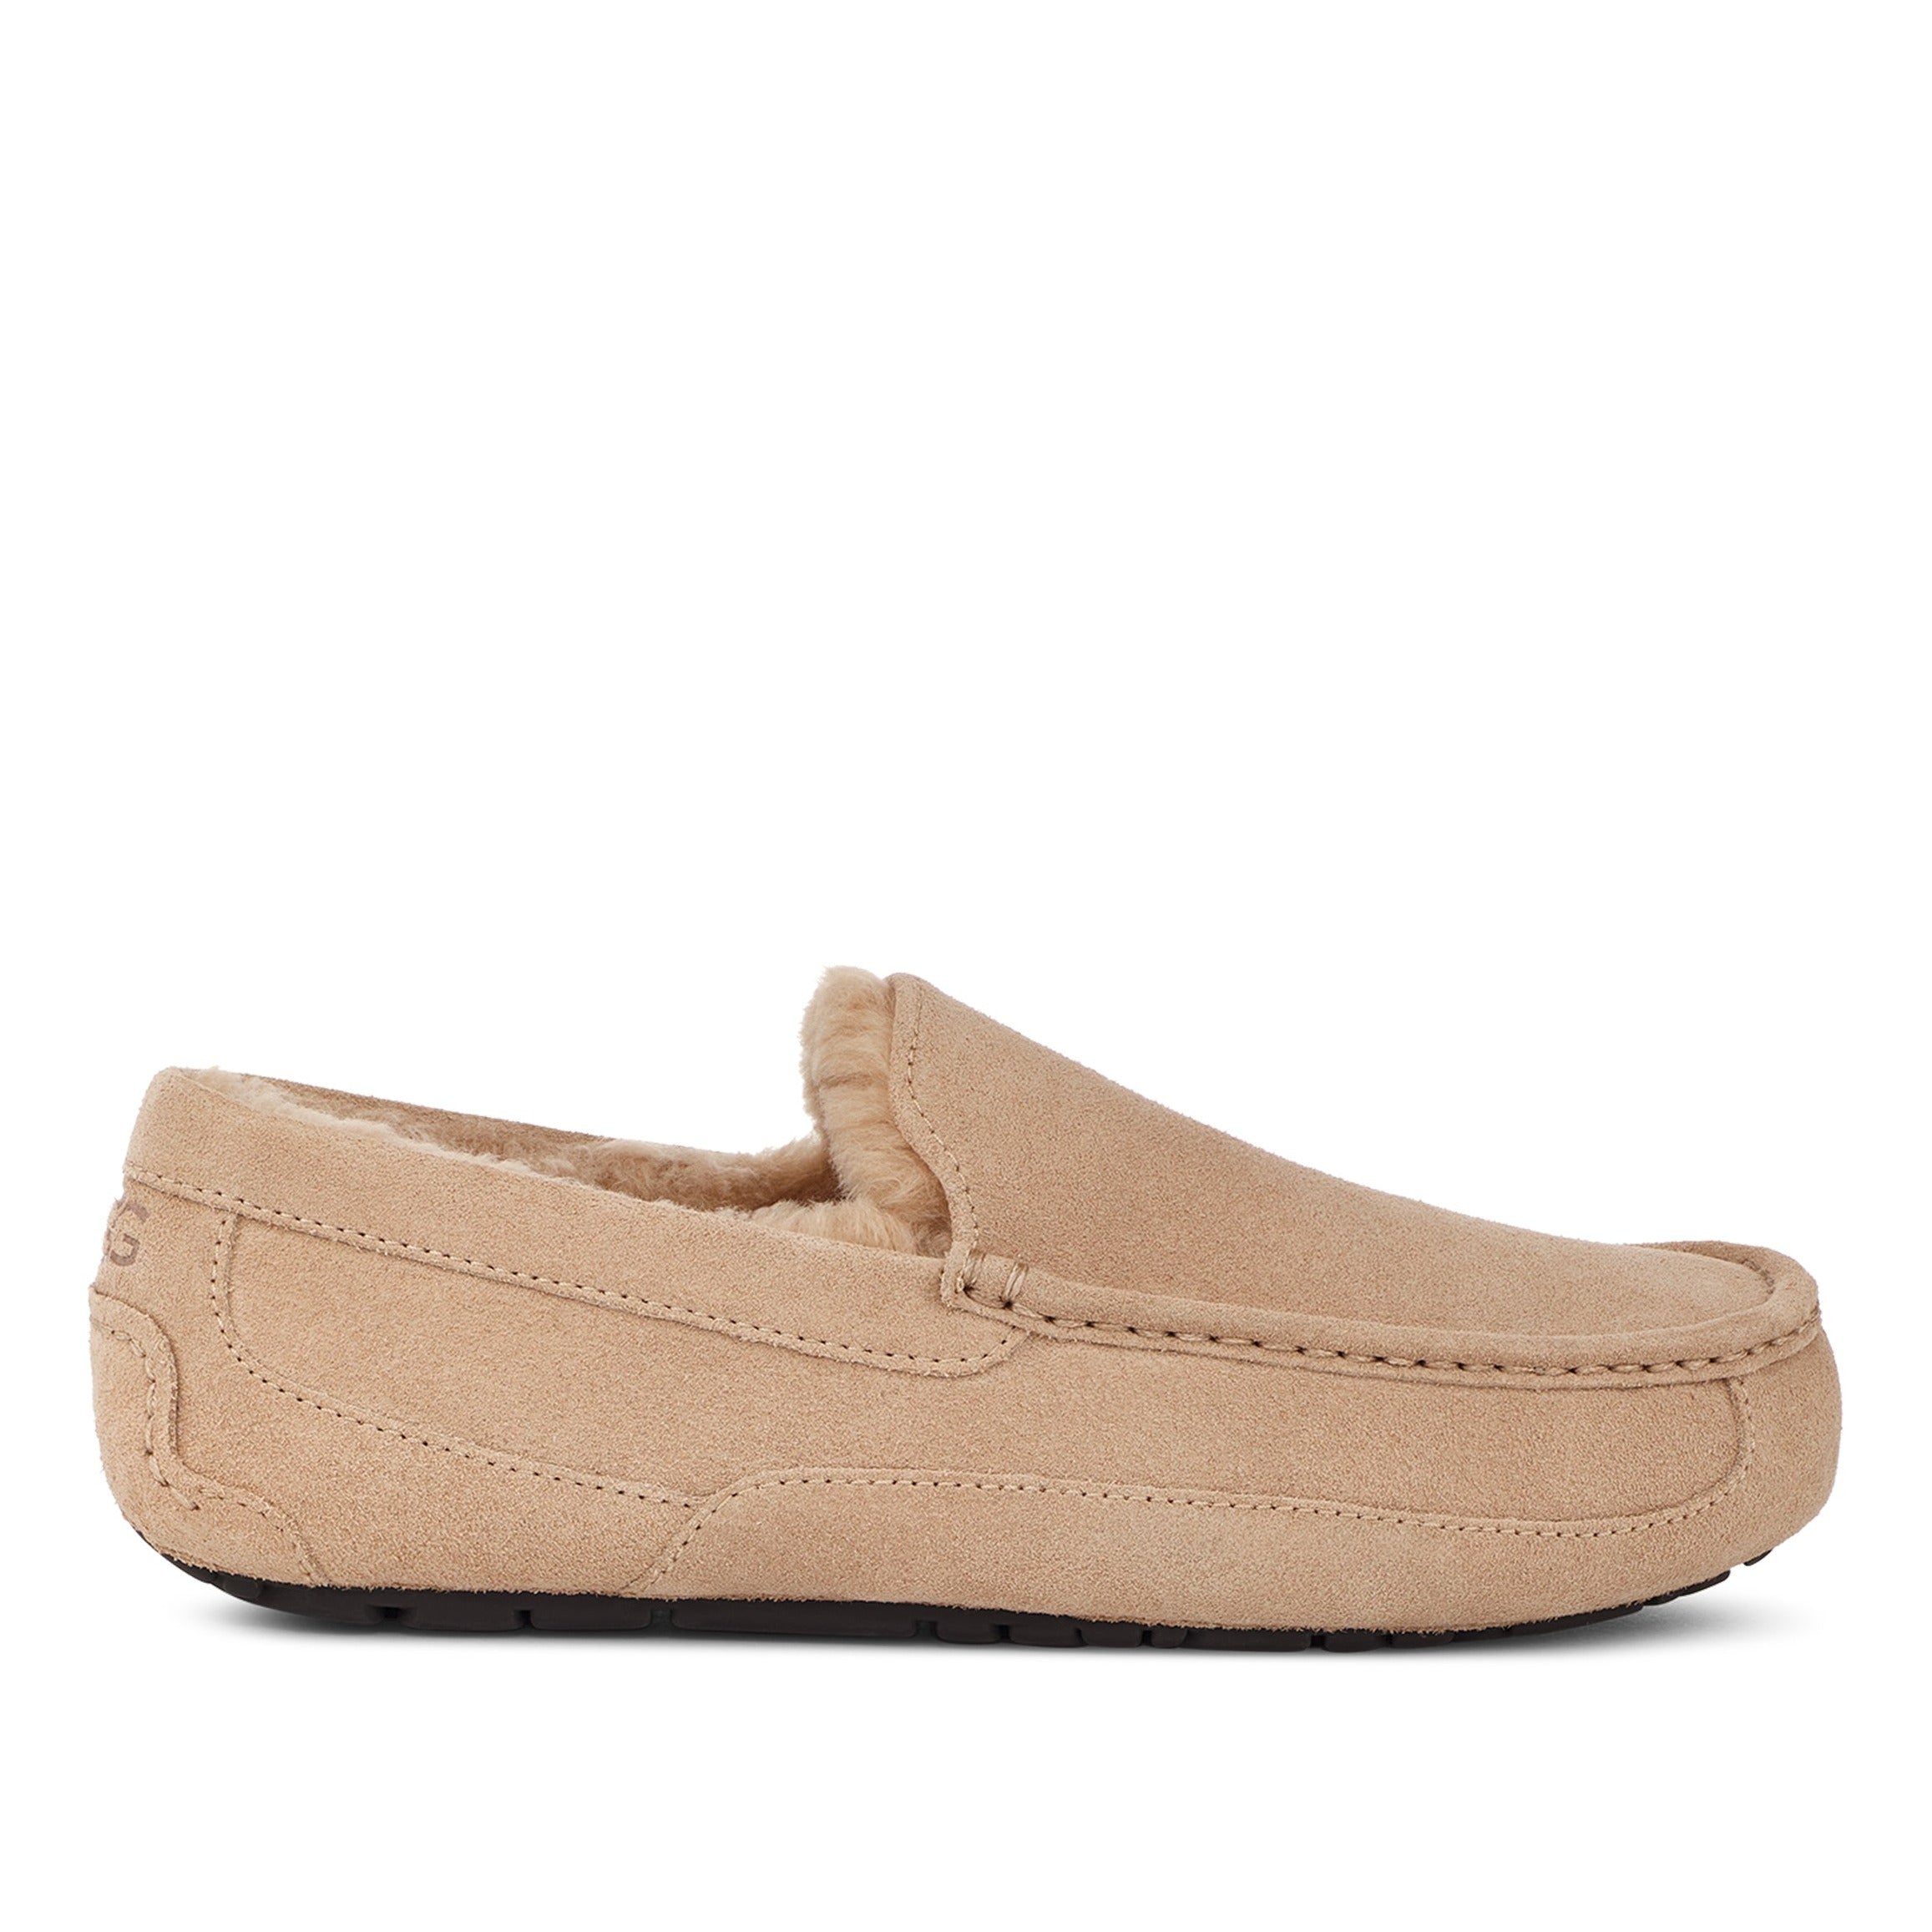 Sample UGG Ascot Loafers &amp; Laceups Sand 8 